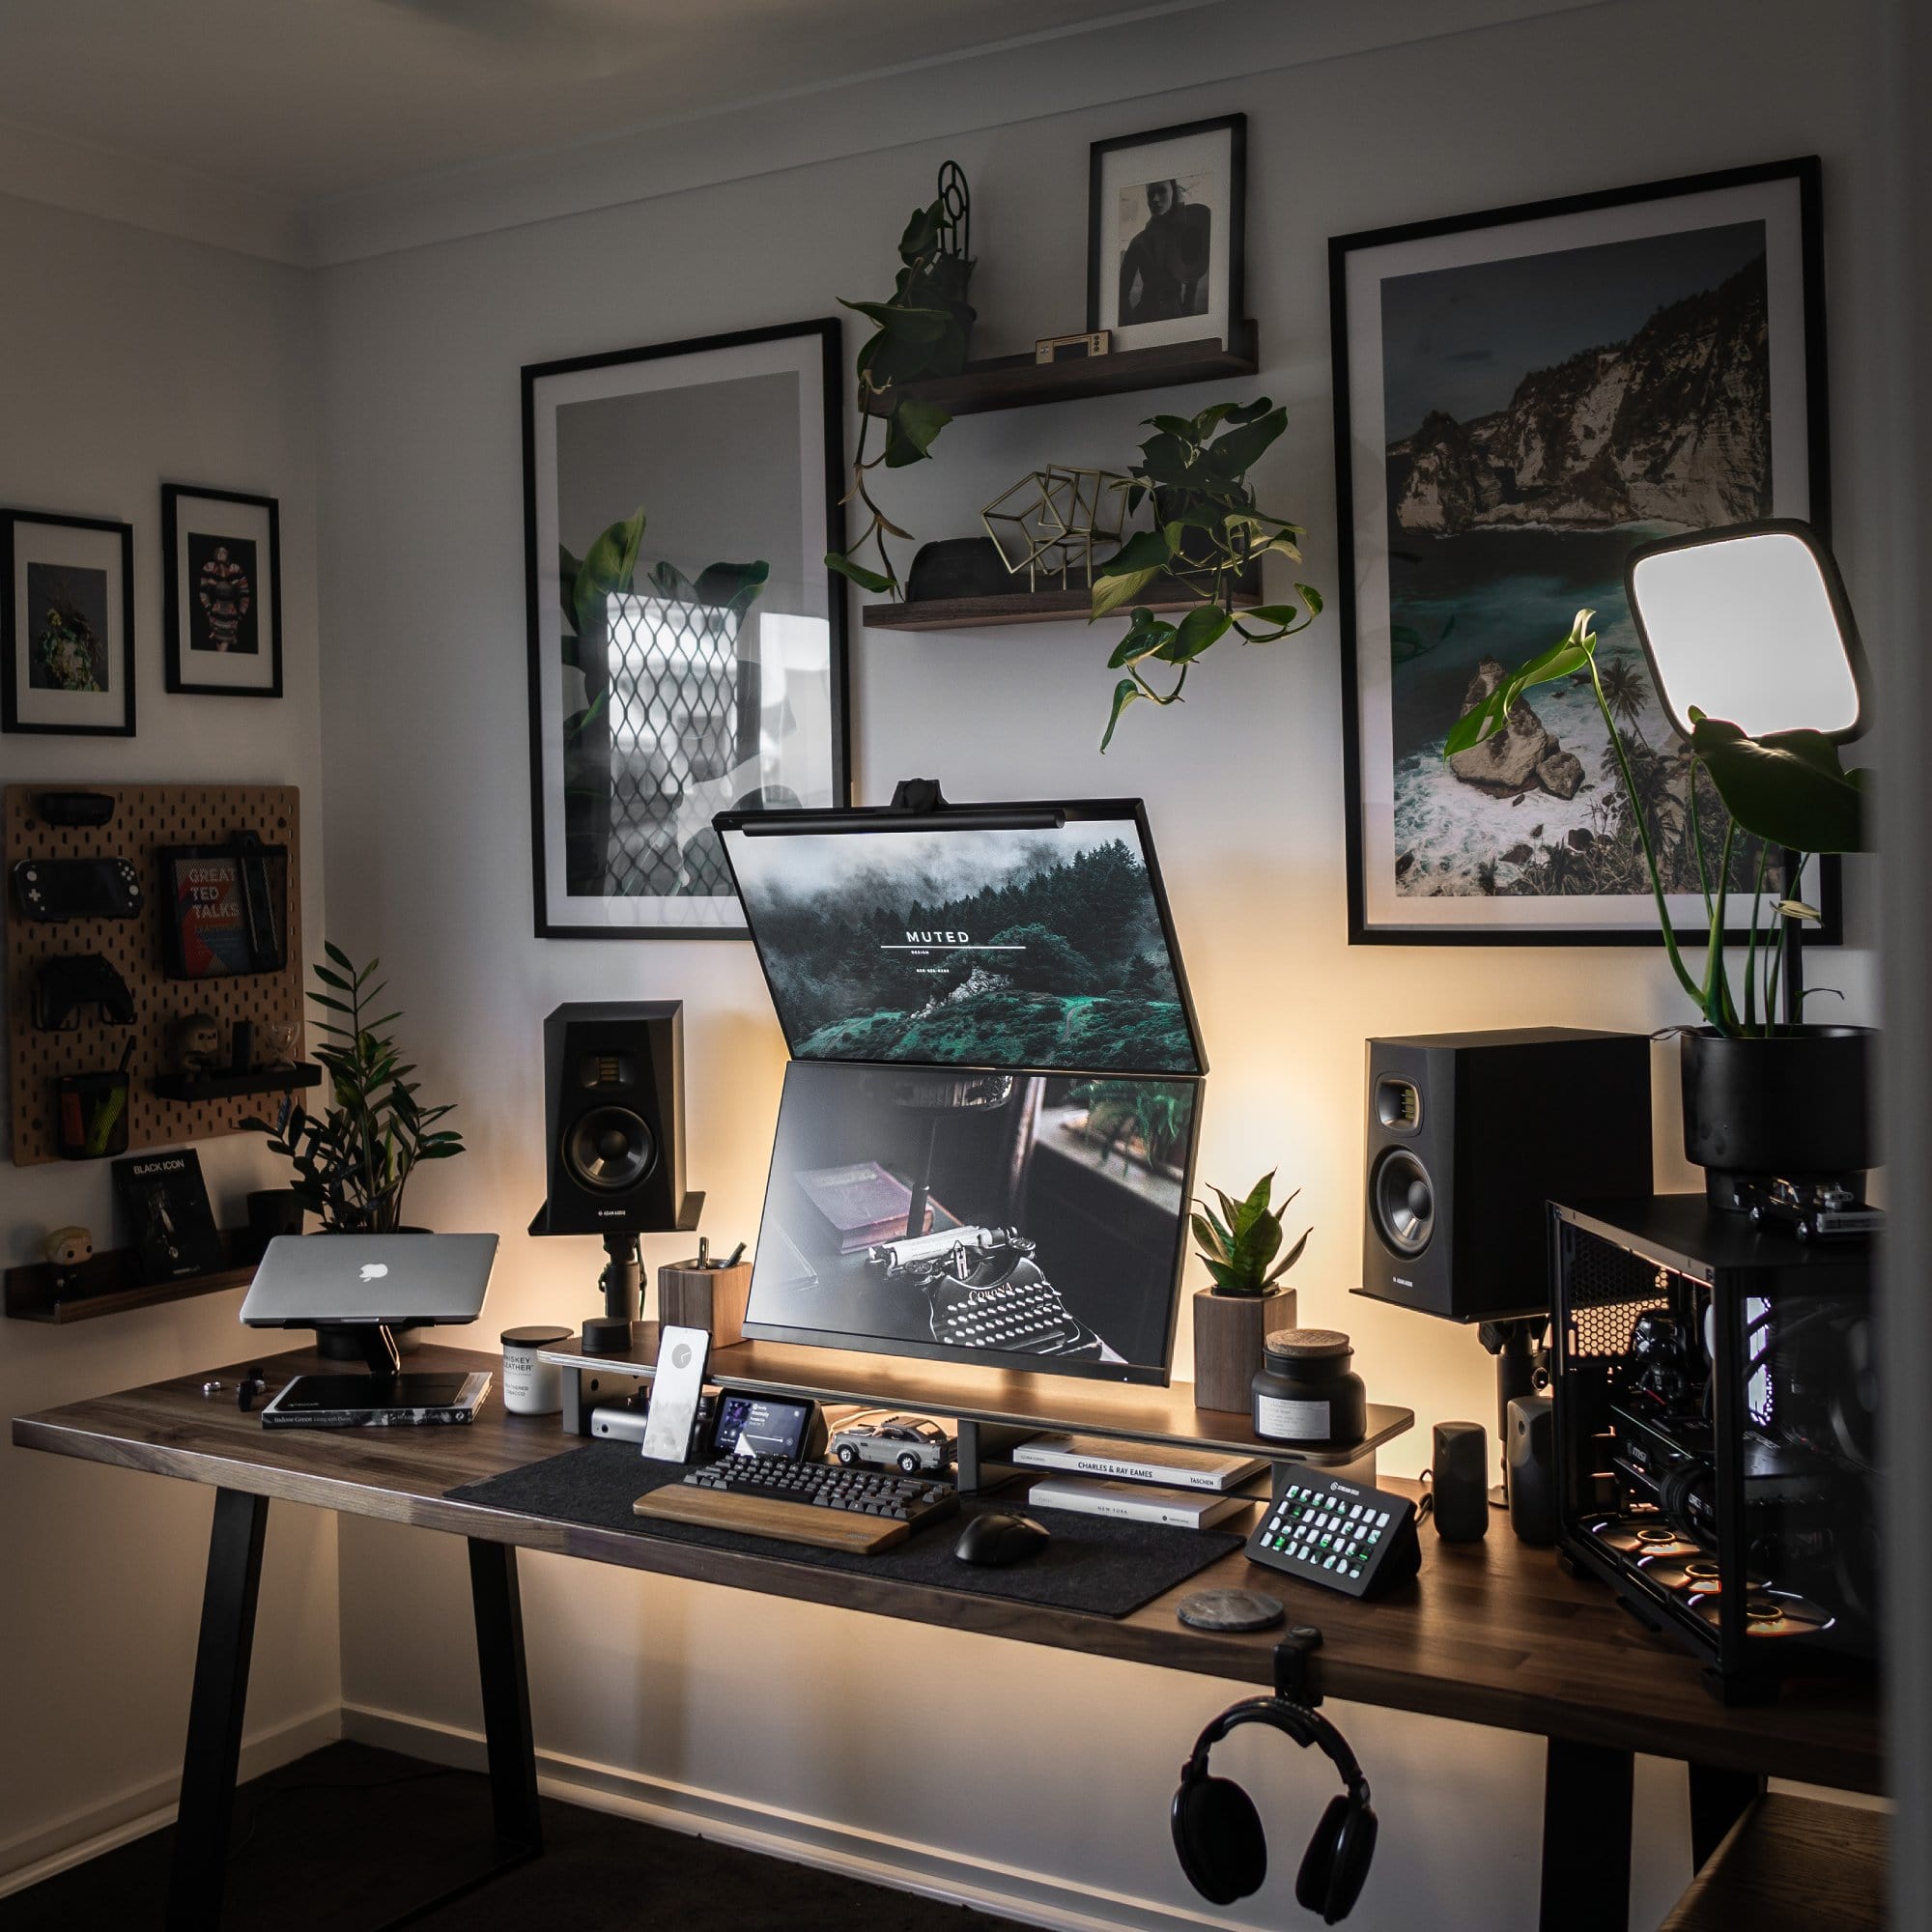 A well-organised, soothing home office setup with two monitors, some devices, peripherals, plants, photos and wall art, as well as a pegboard and shelves for more storage